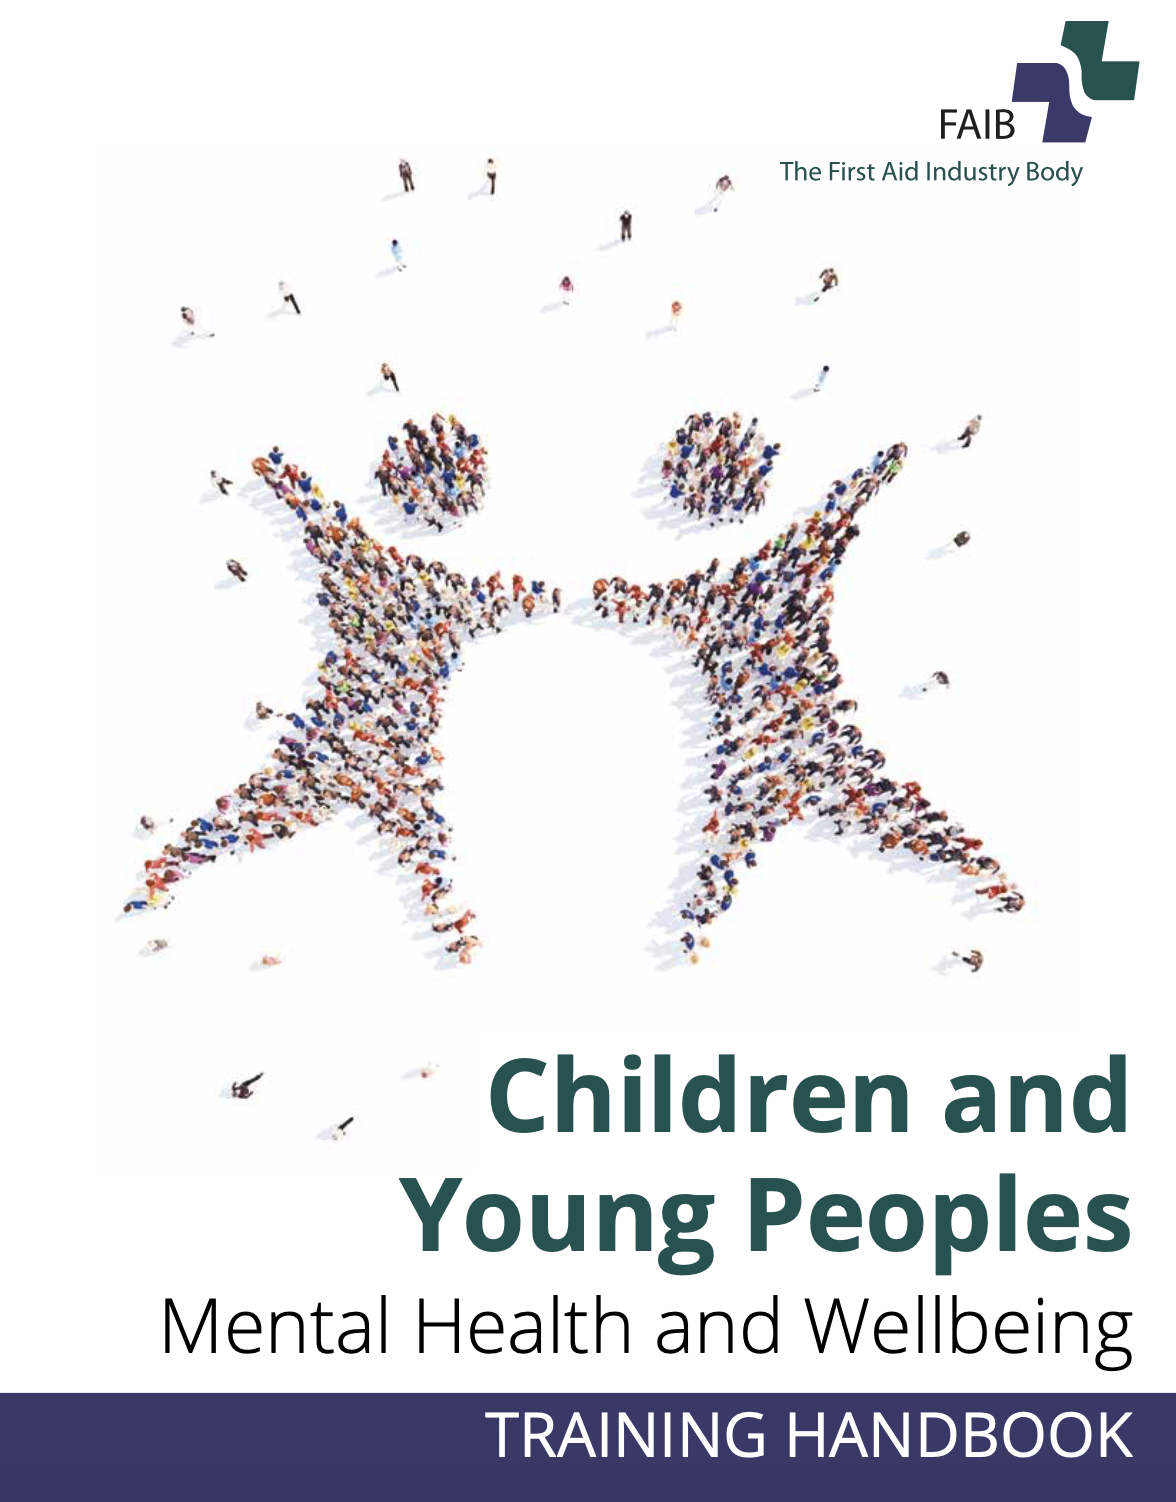 Children and young people mental health and wellbeing